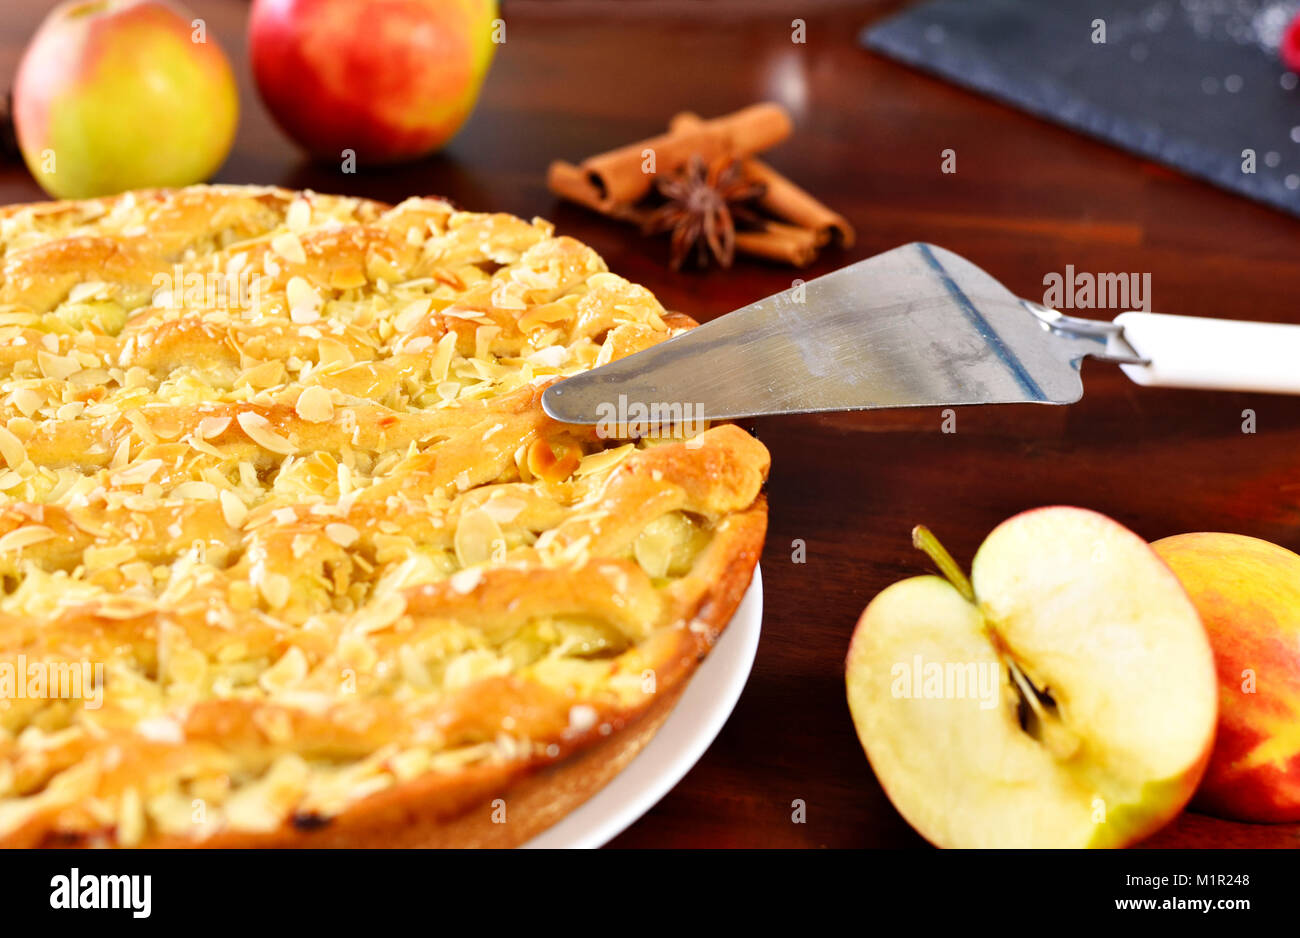 Fresh apple pie or fruitcake on a wooden table. Apple pie and fresh apples, cinnamon and star anise. Cake background. Stock Photo